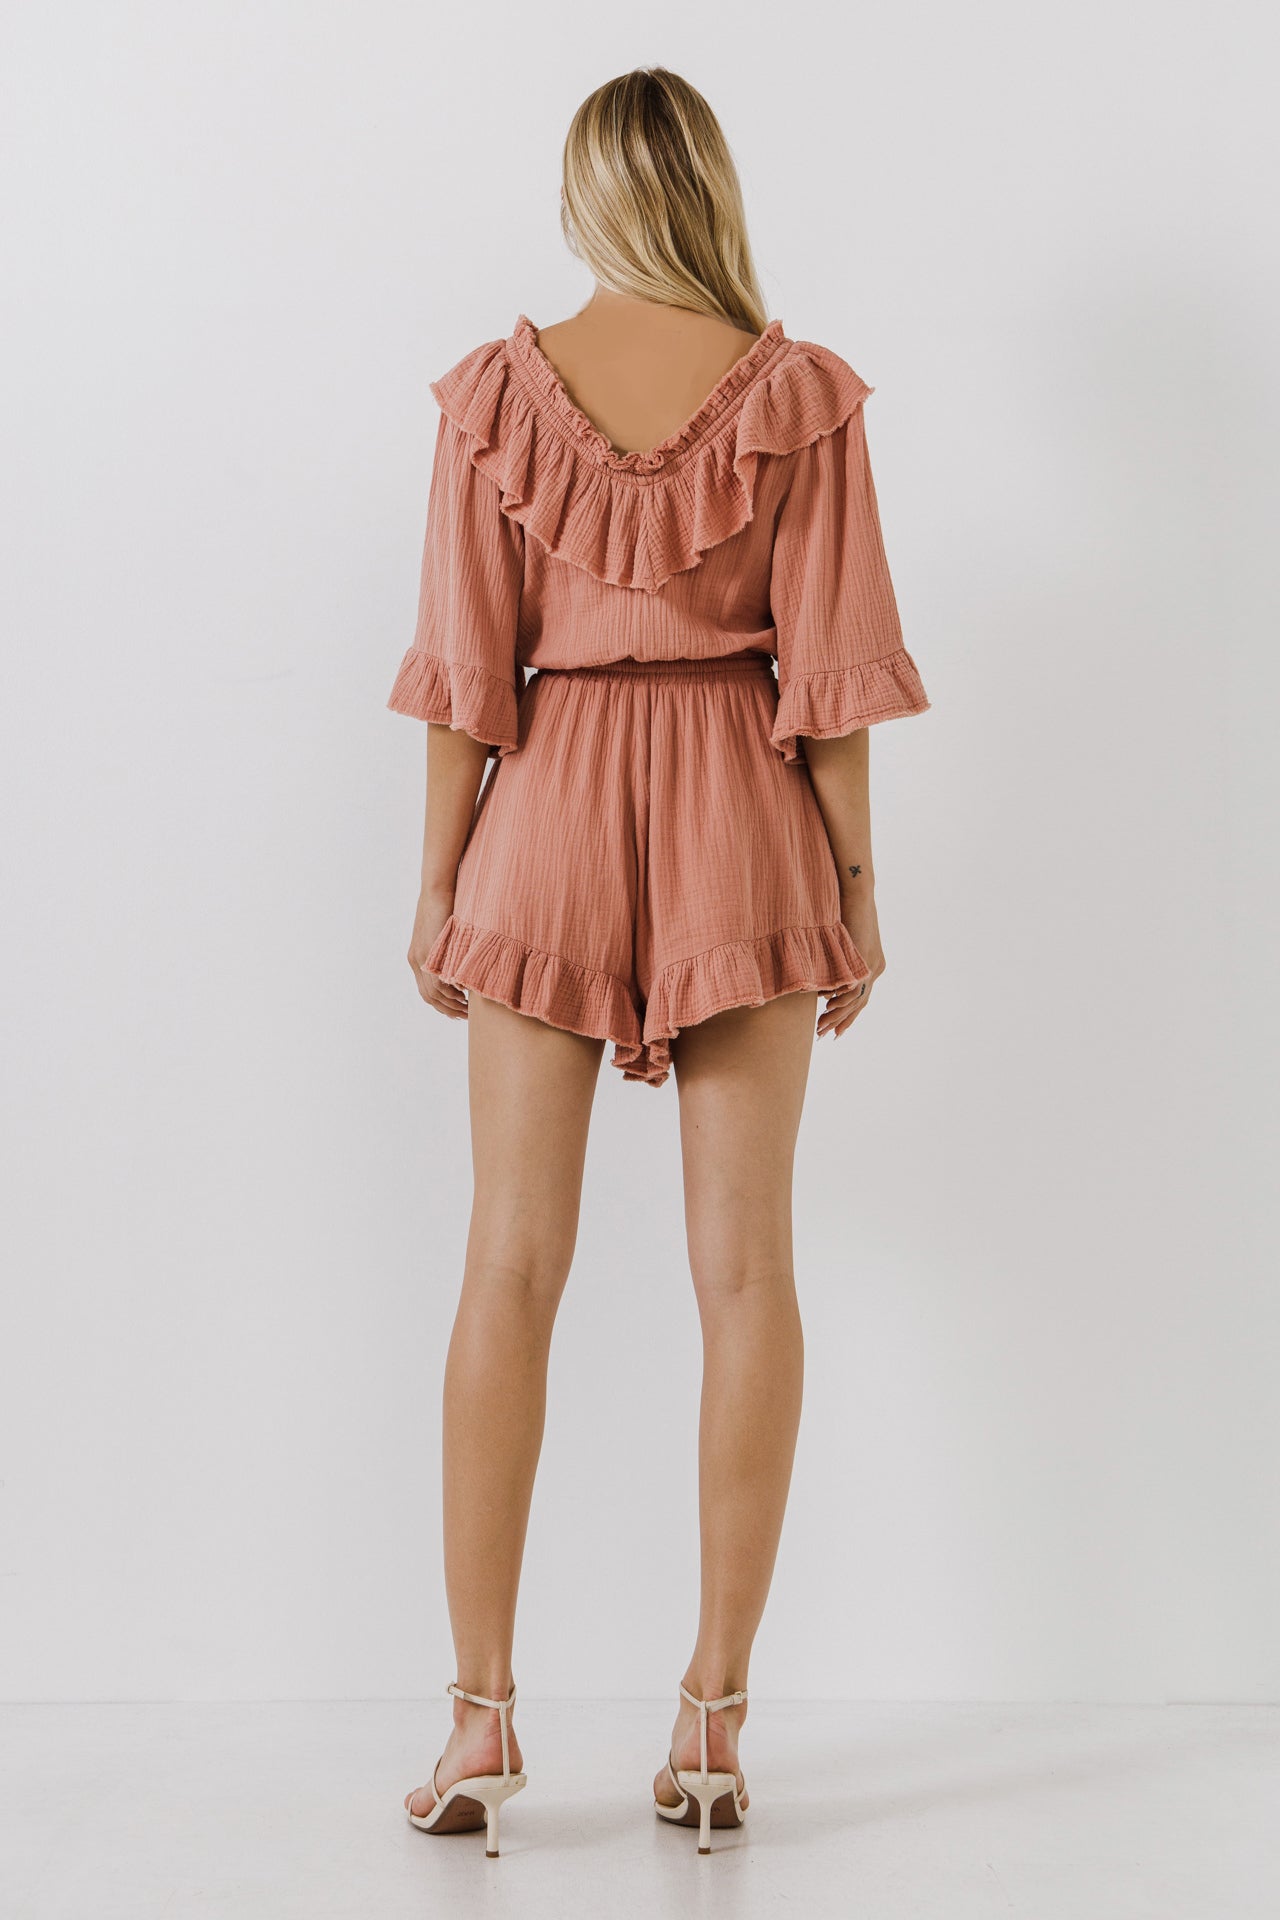 FREE THE ROSES - Ruffle Romper - ROMPERS available at Objectrare